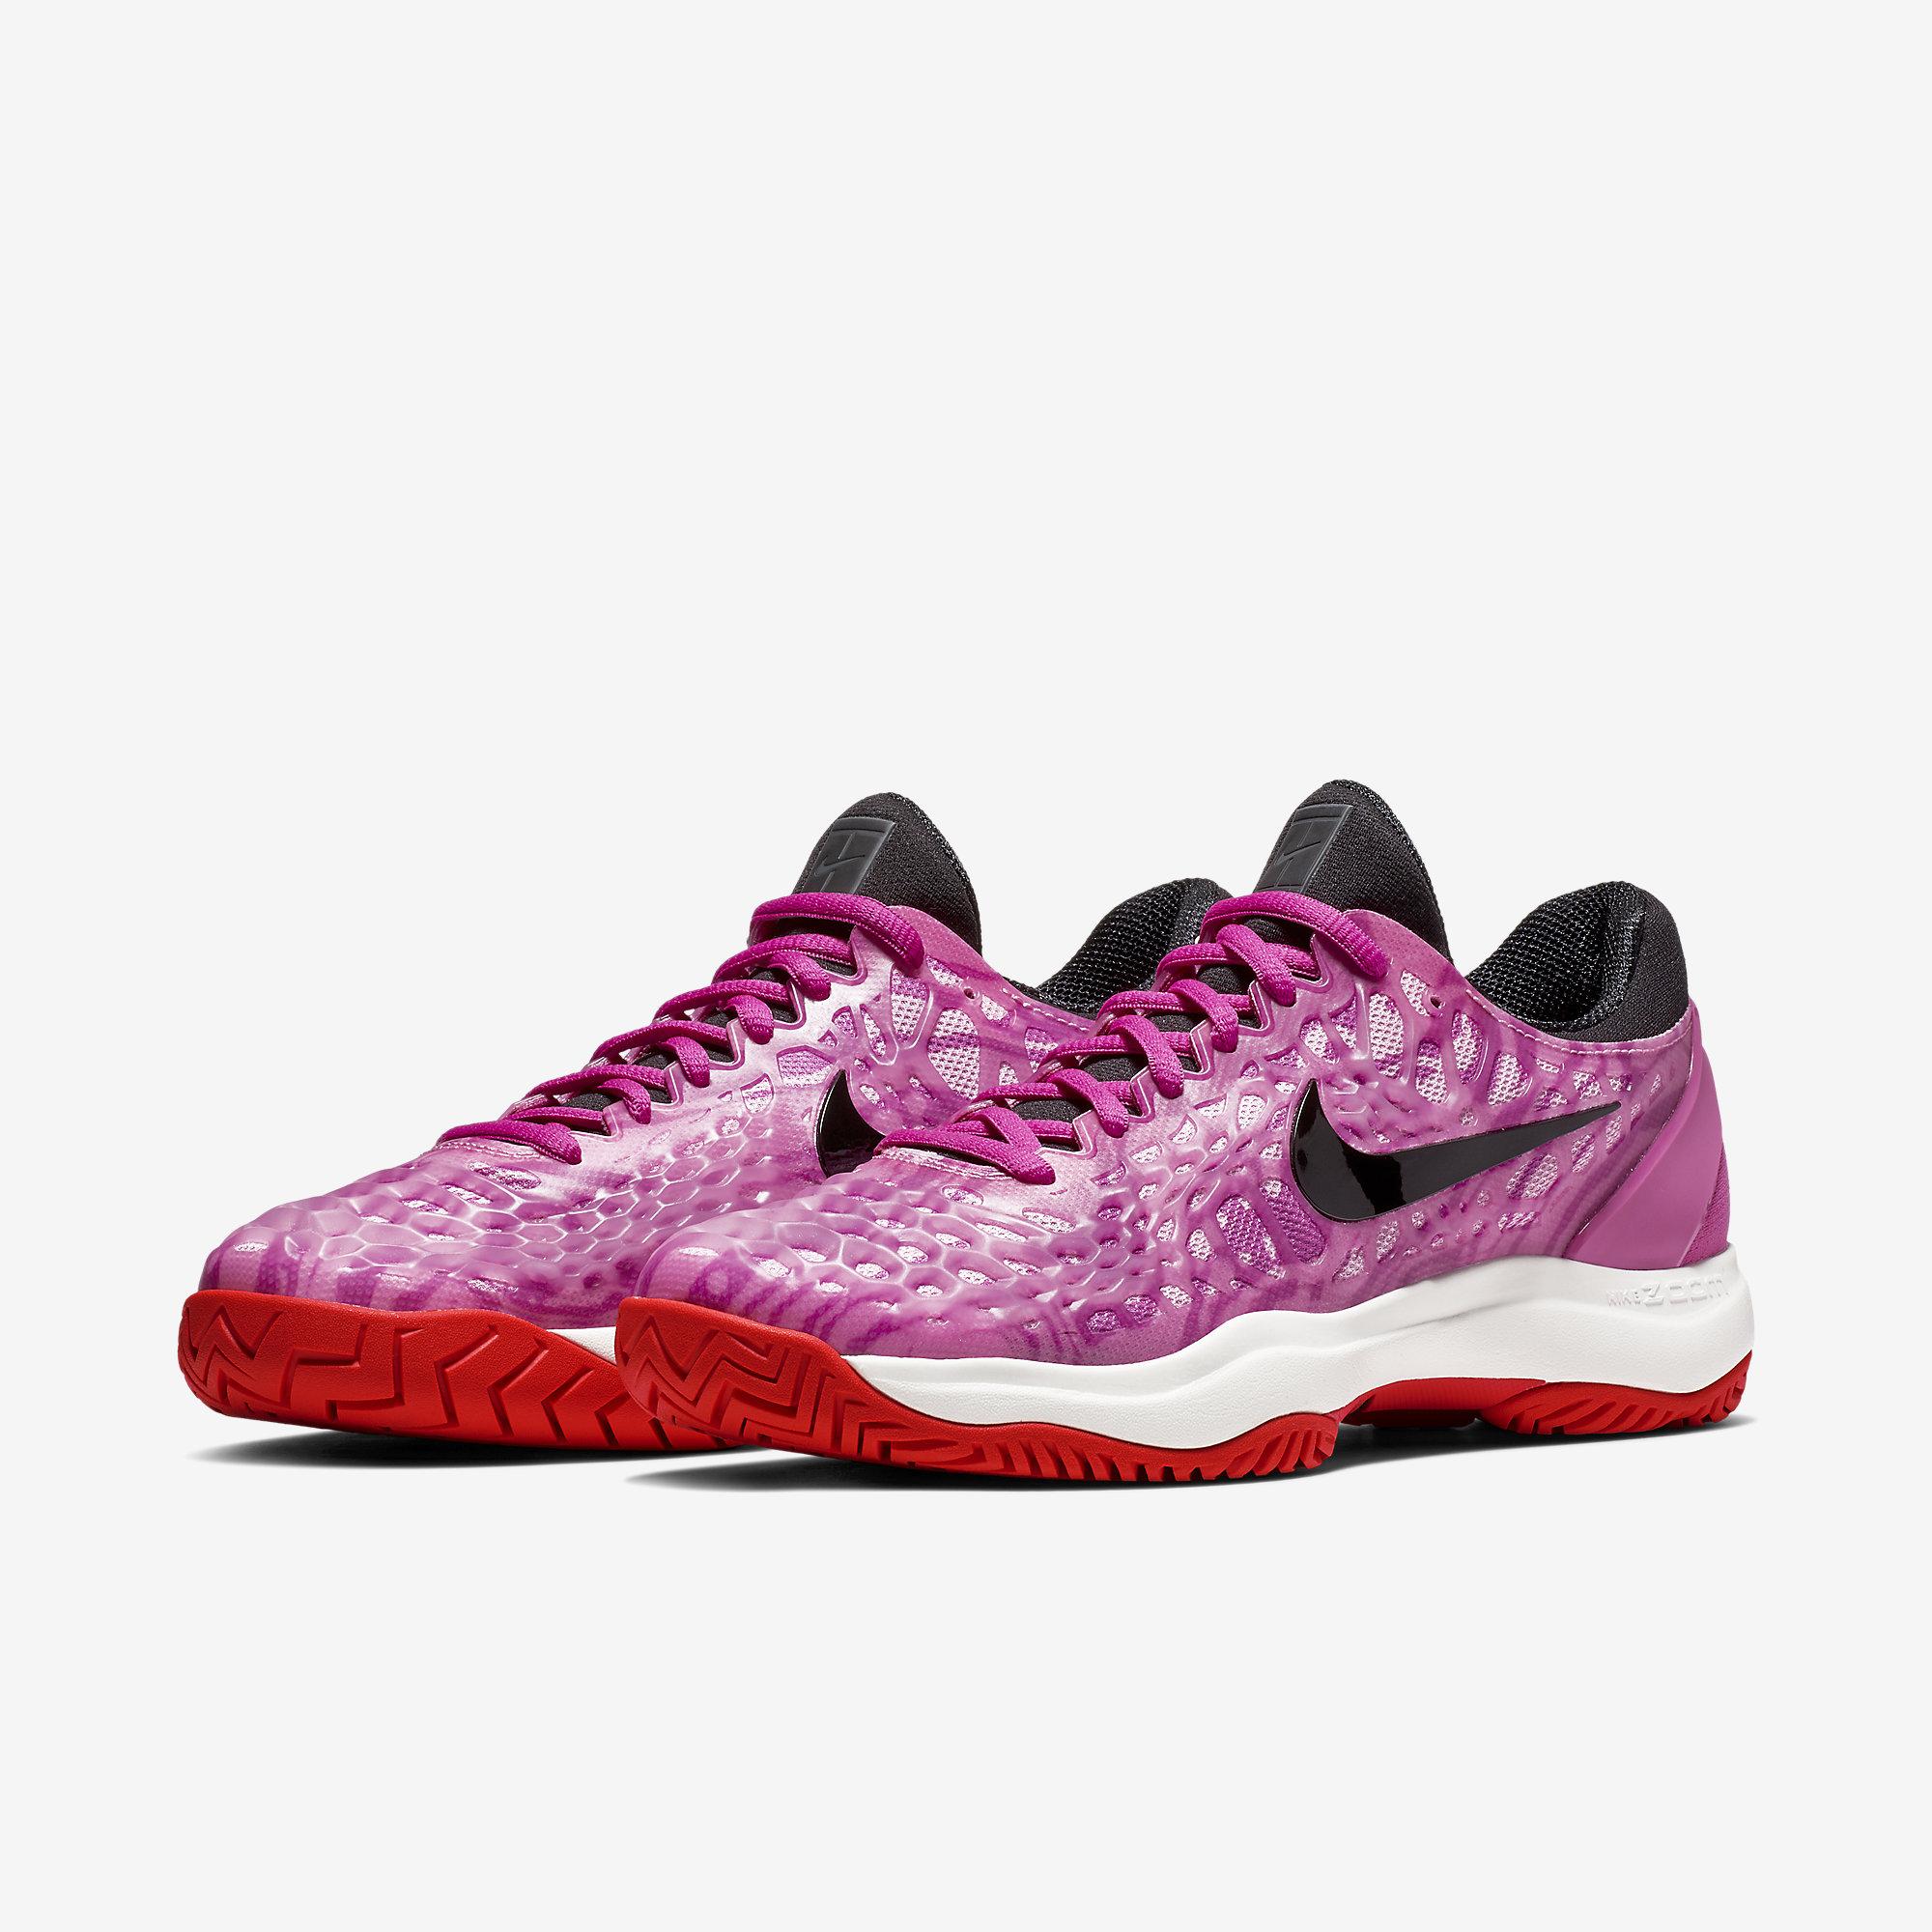 Nike Womens Zoom Cage 3 Tennis Shoes - Active Fuchsia/Psychic Pink ...